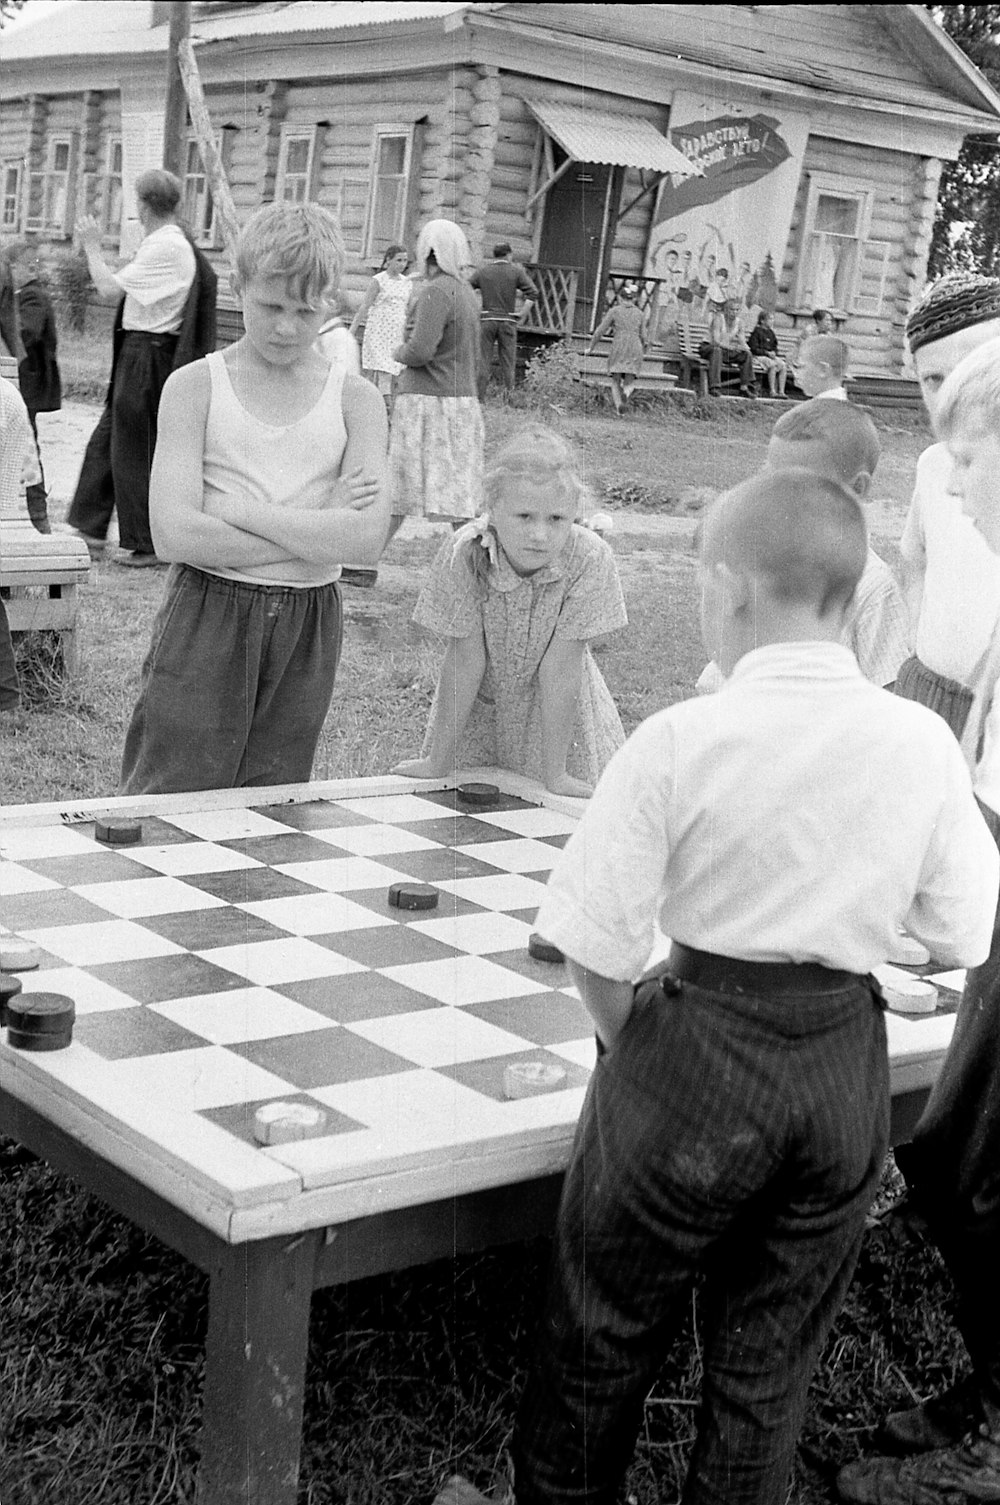 a group of people playing a game of chess